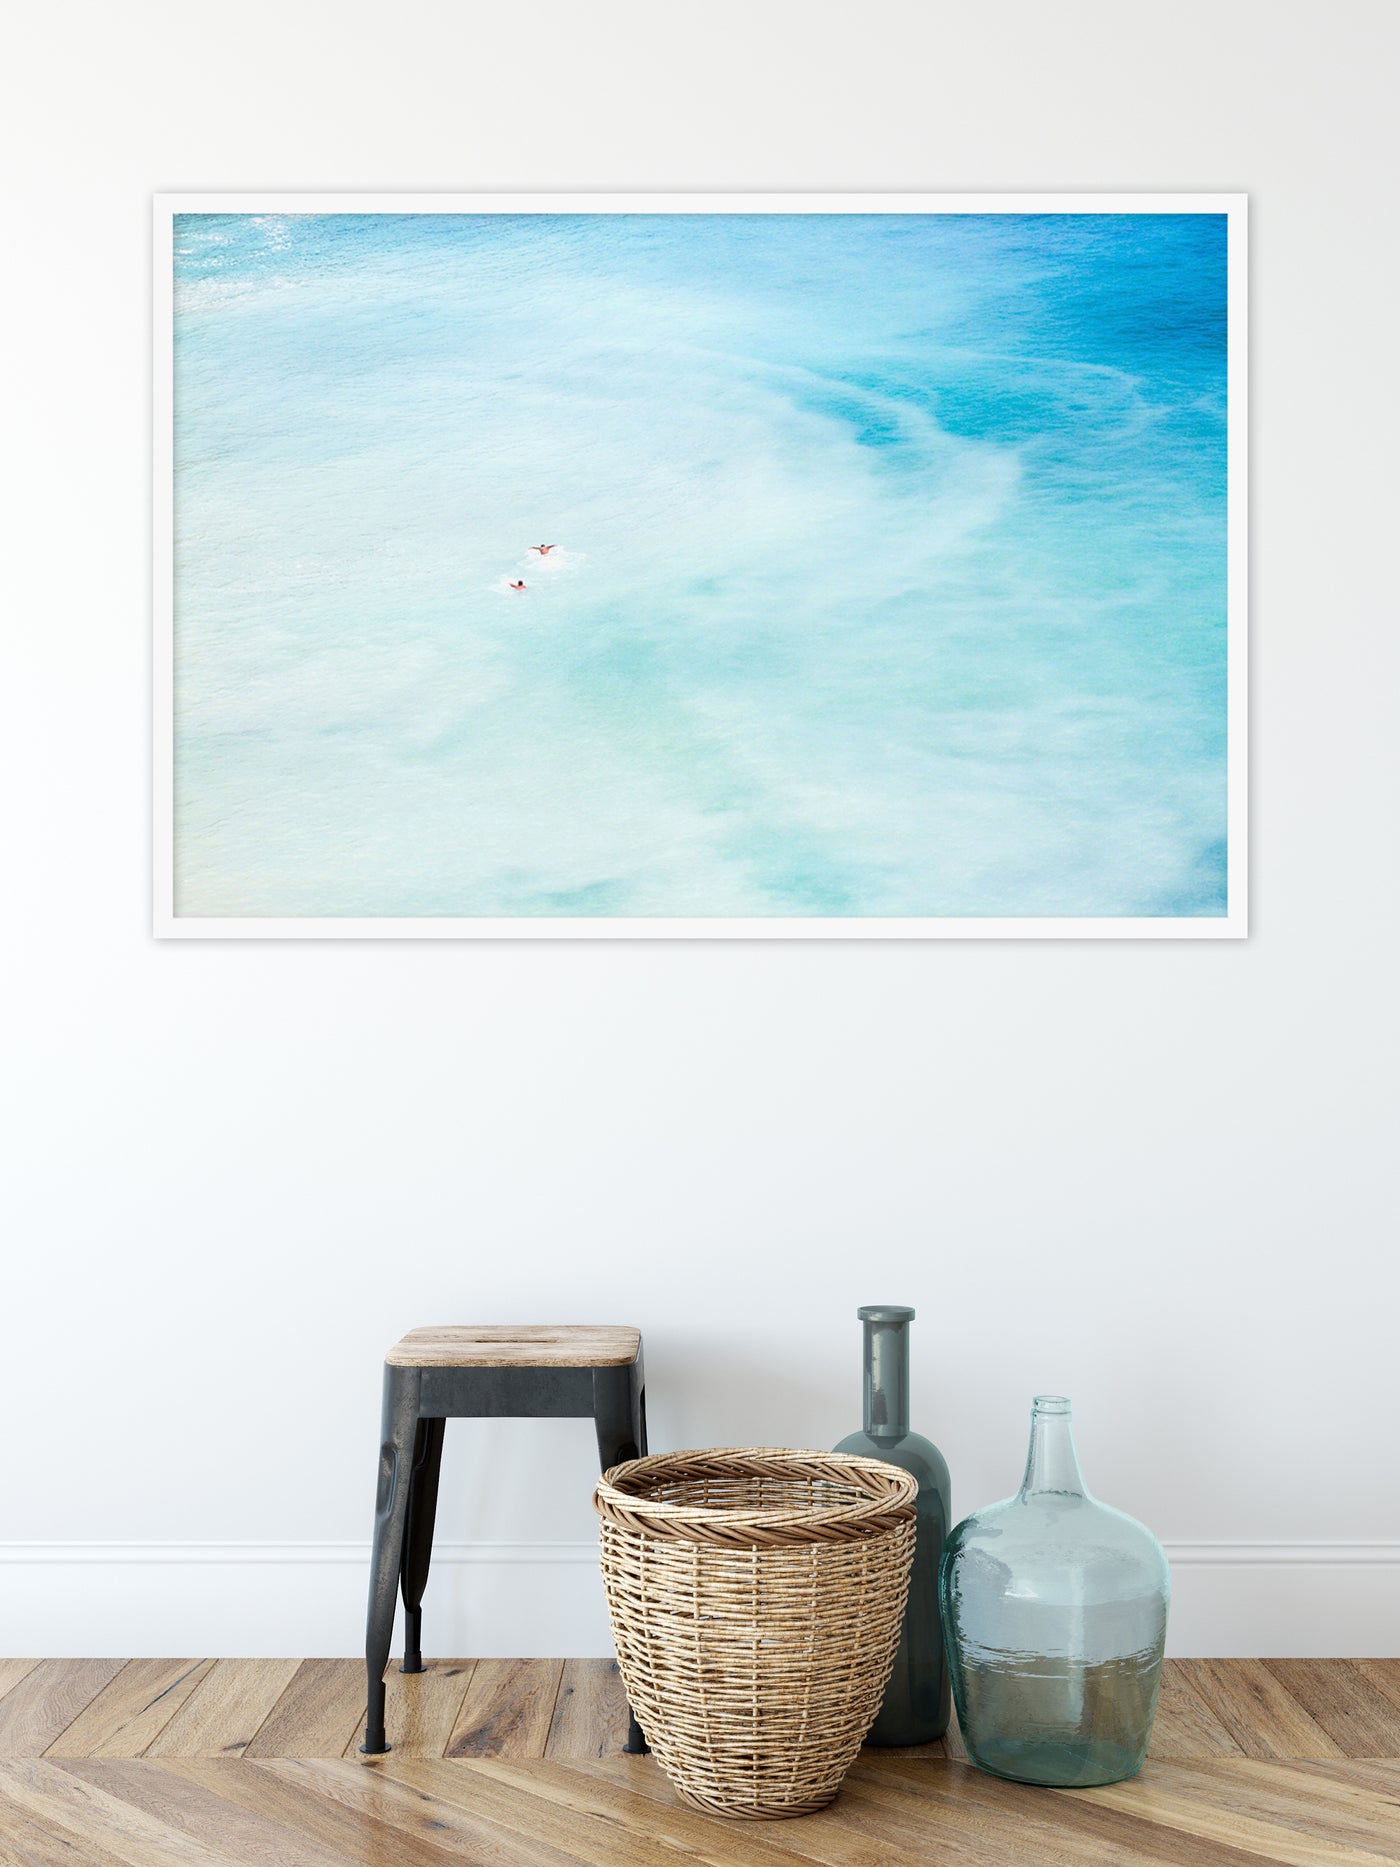 Magoito - Large turquoise ocean fine art print by Cattie Coyle Photography